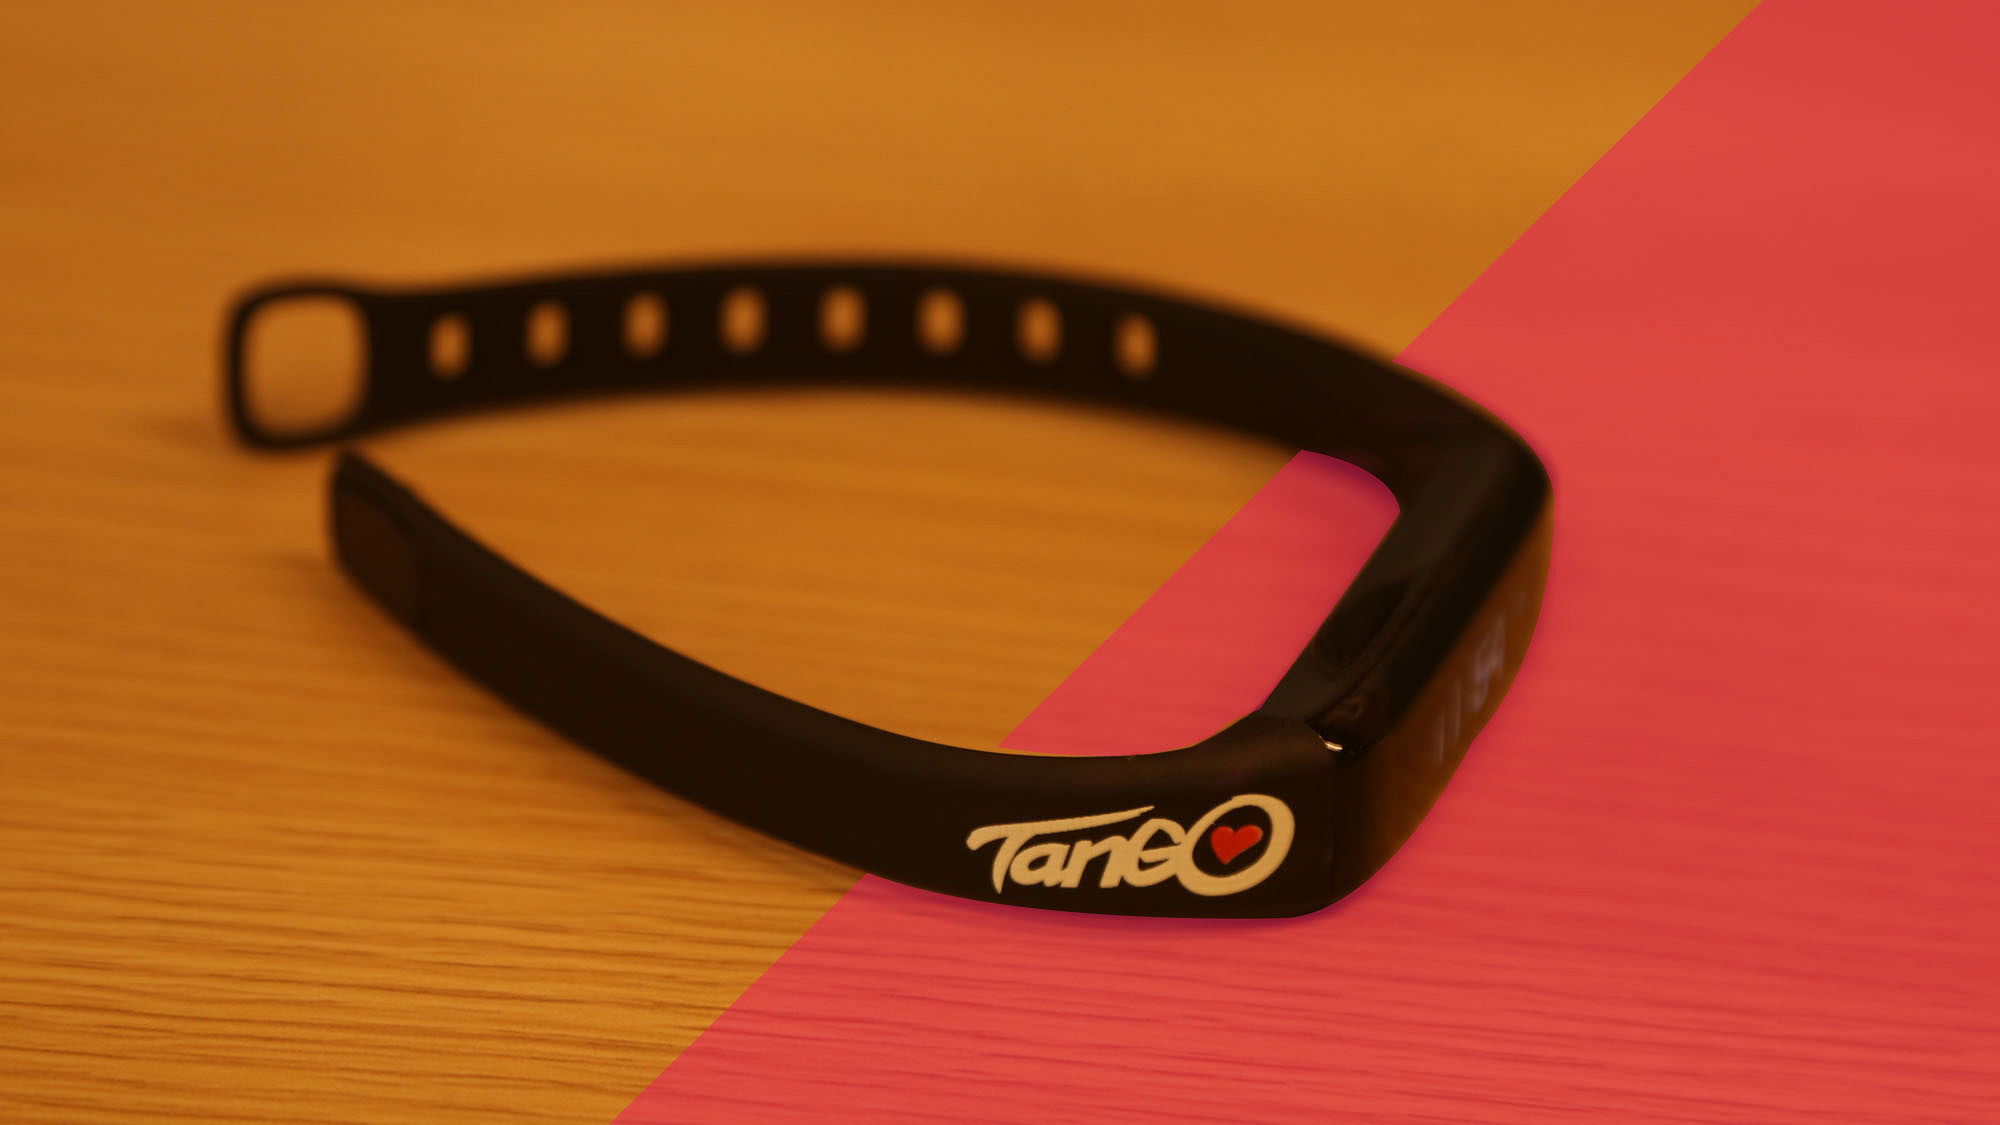 Tango Wellness Motivator is a fitness band available under Rs. 5,000 in India (Photo: Shiv Kumar Maurya/<b>The Quint</b>)